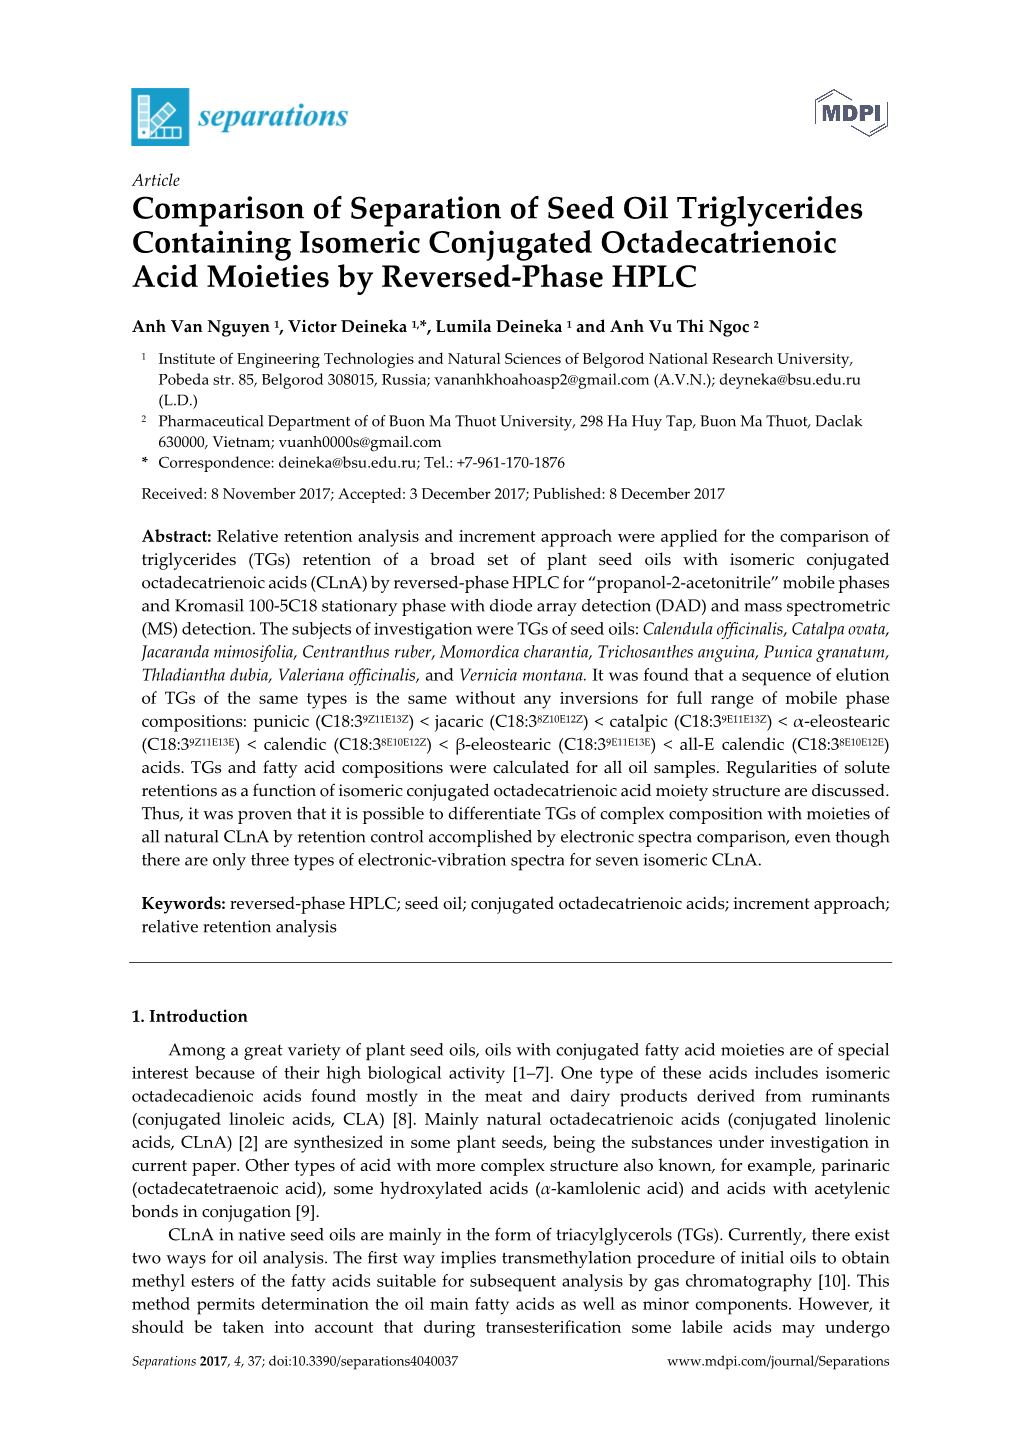 Comparison of Separation of Seed Oil Triglycerides Containing Isomeric Conjugated Octadecatrienoic Acid Moieties by Reversed-Phase HPLC